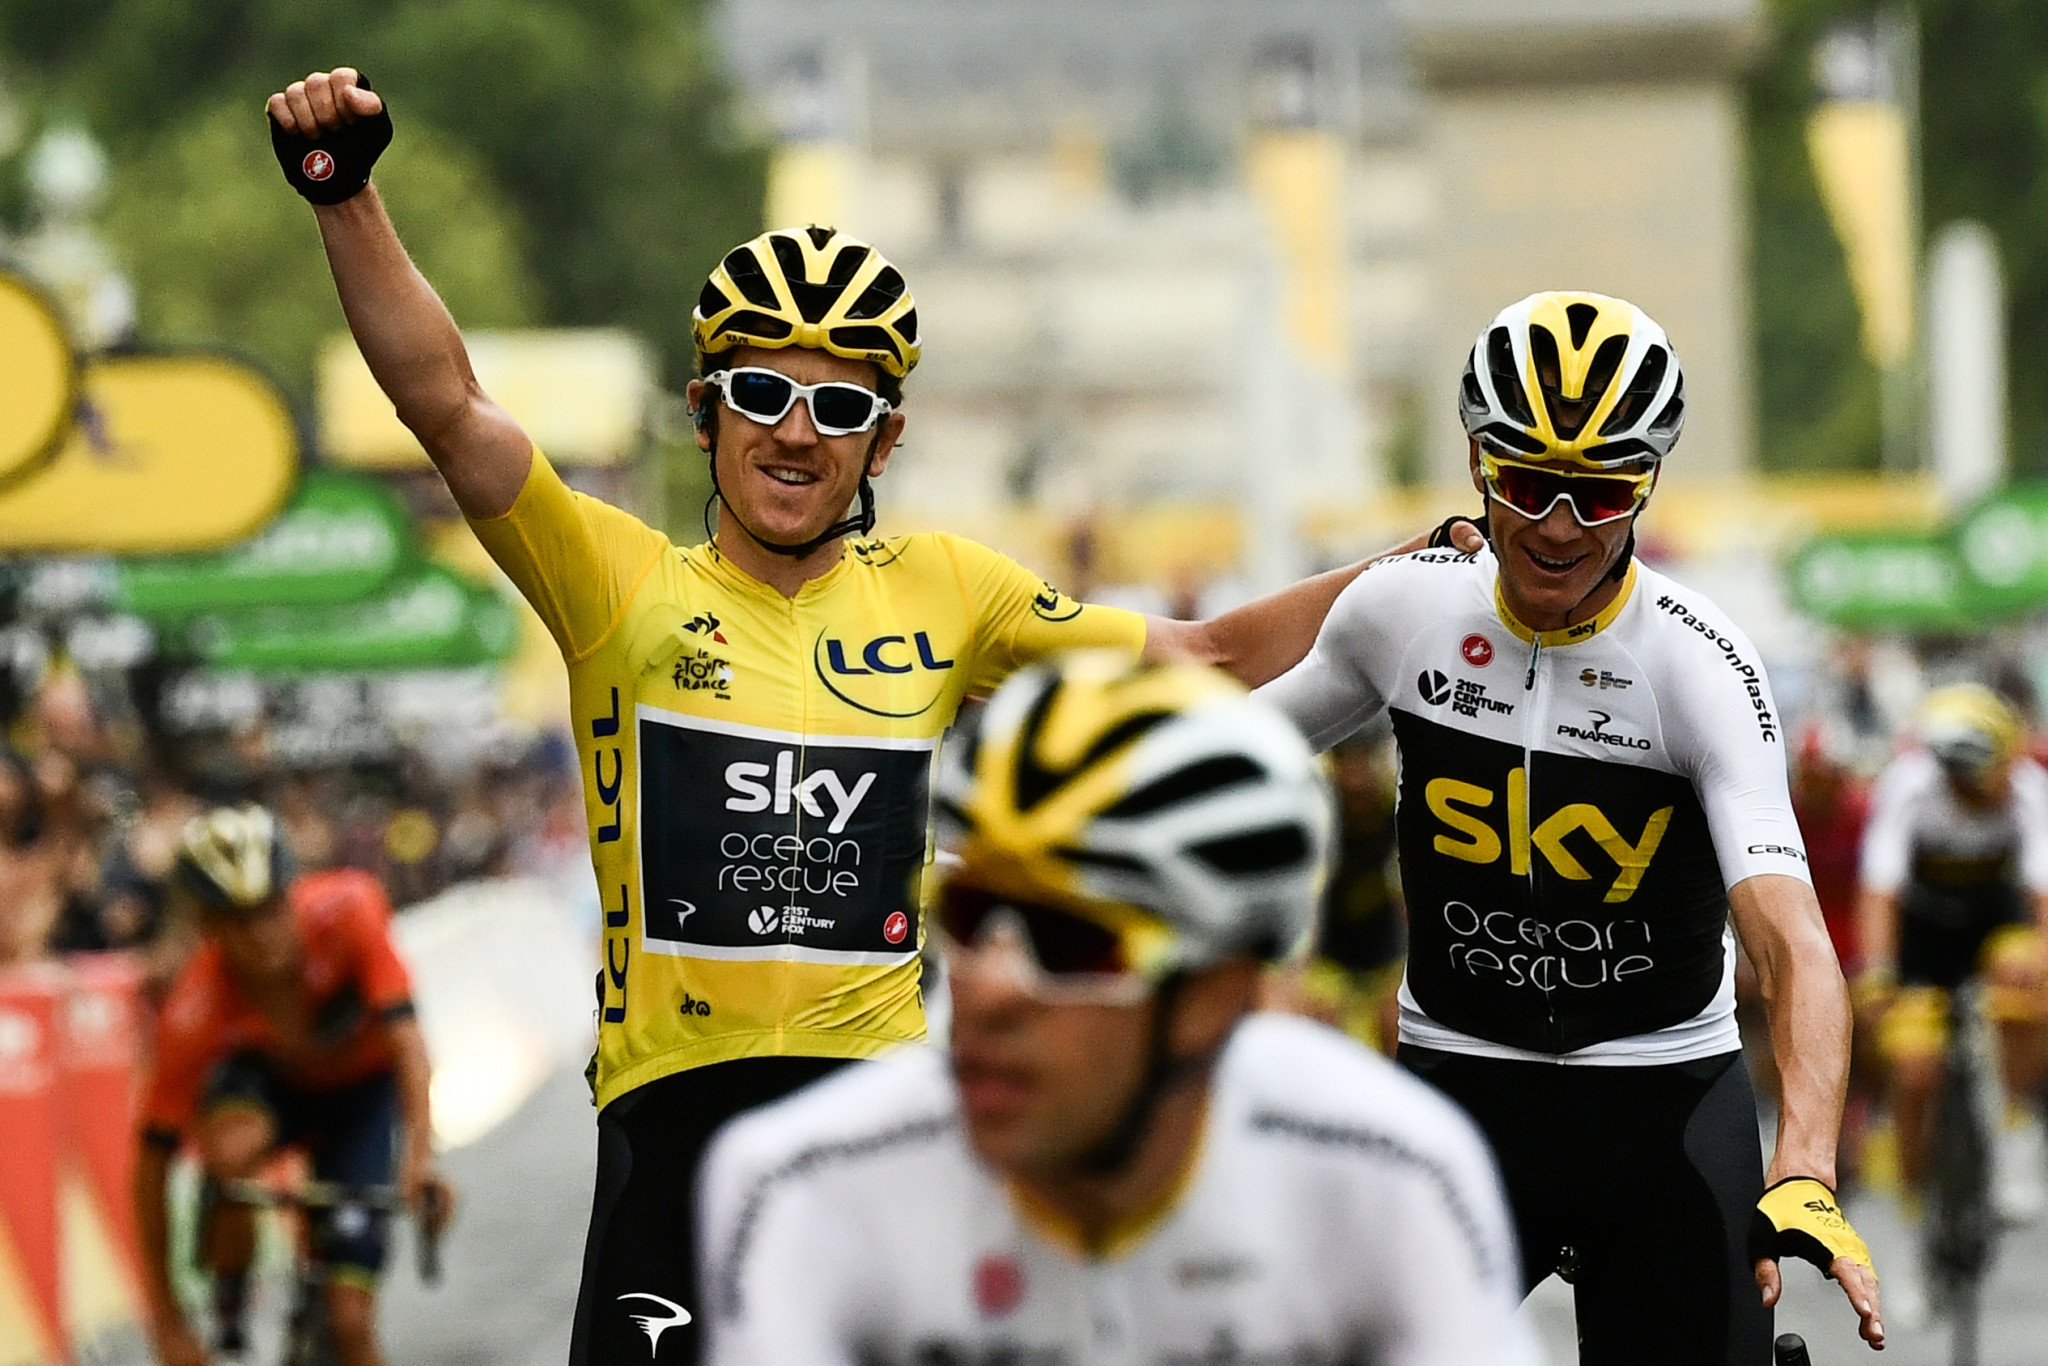 Geraint Thomas  has become the third British rider in seven years to win the Tour de France after finishing the final stage in Paris alongside teammate Chris Froome today ©Getty Images